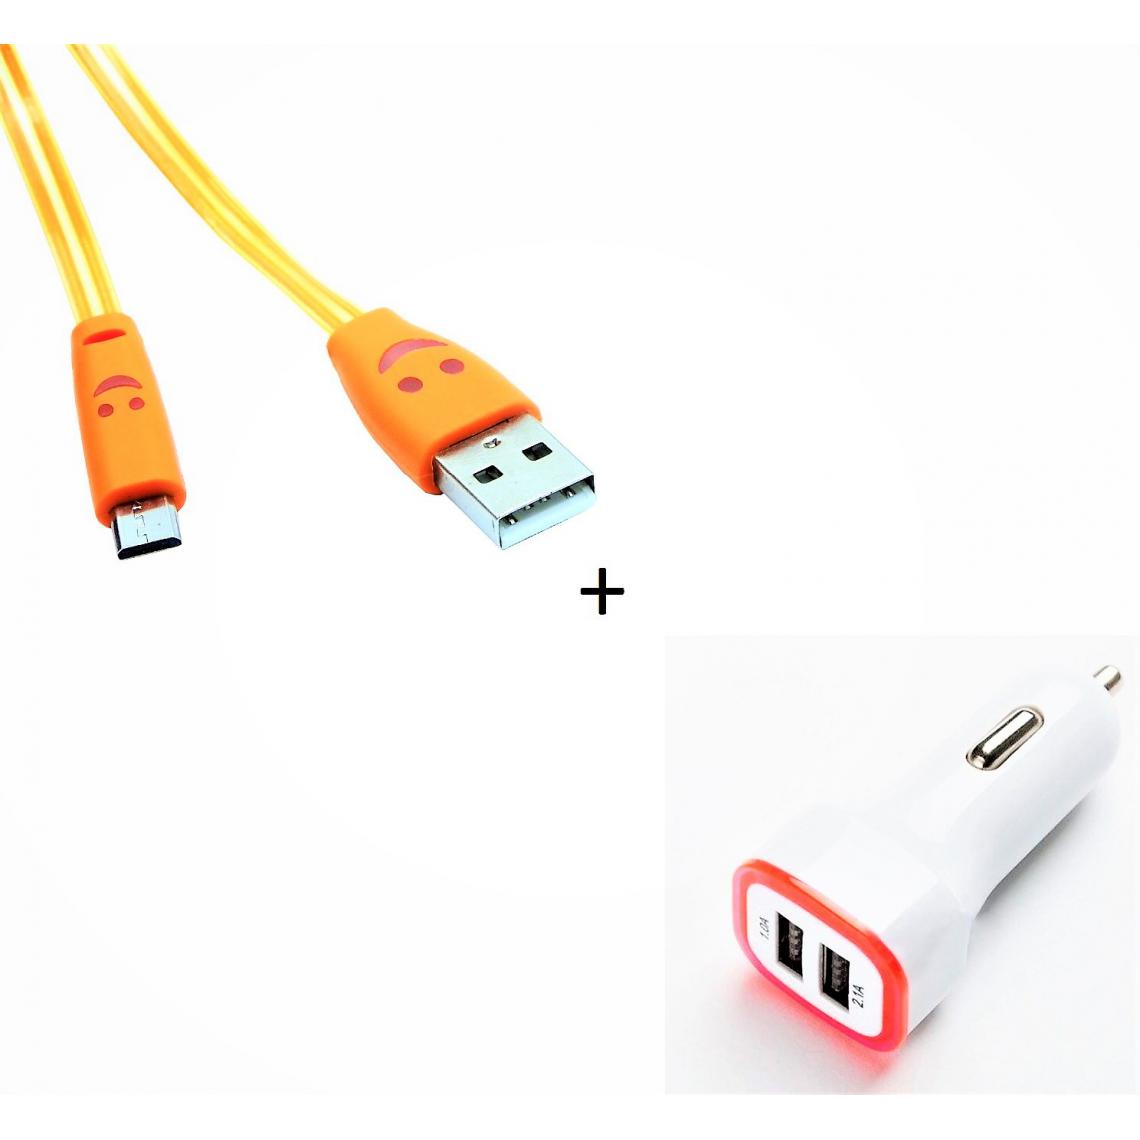 Shot - Pack Chargeur Voiture pour NOKIA 1 PLUS Smartphone Micro USB (Cable Smiley + Double Adaptateur LED Allume Cigare) (ORANGE) - Chargeur Voiture 12V